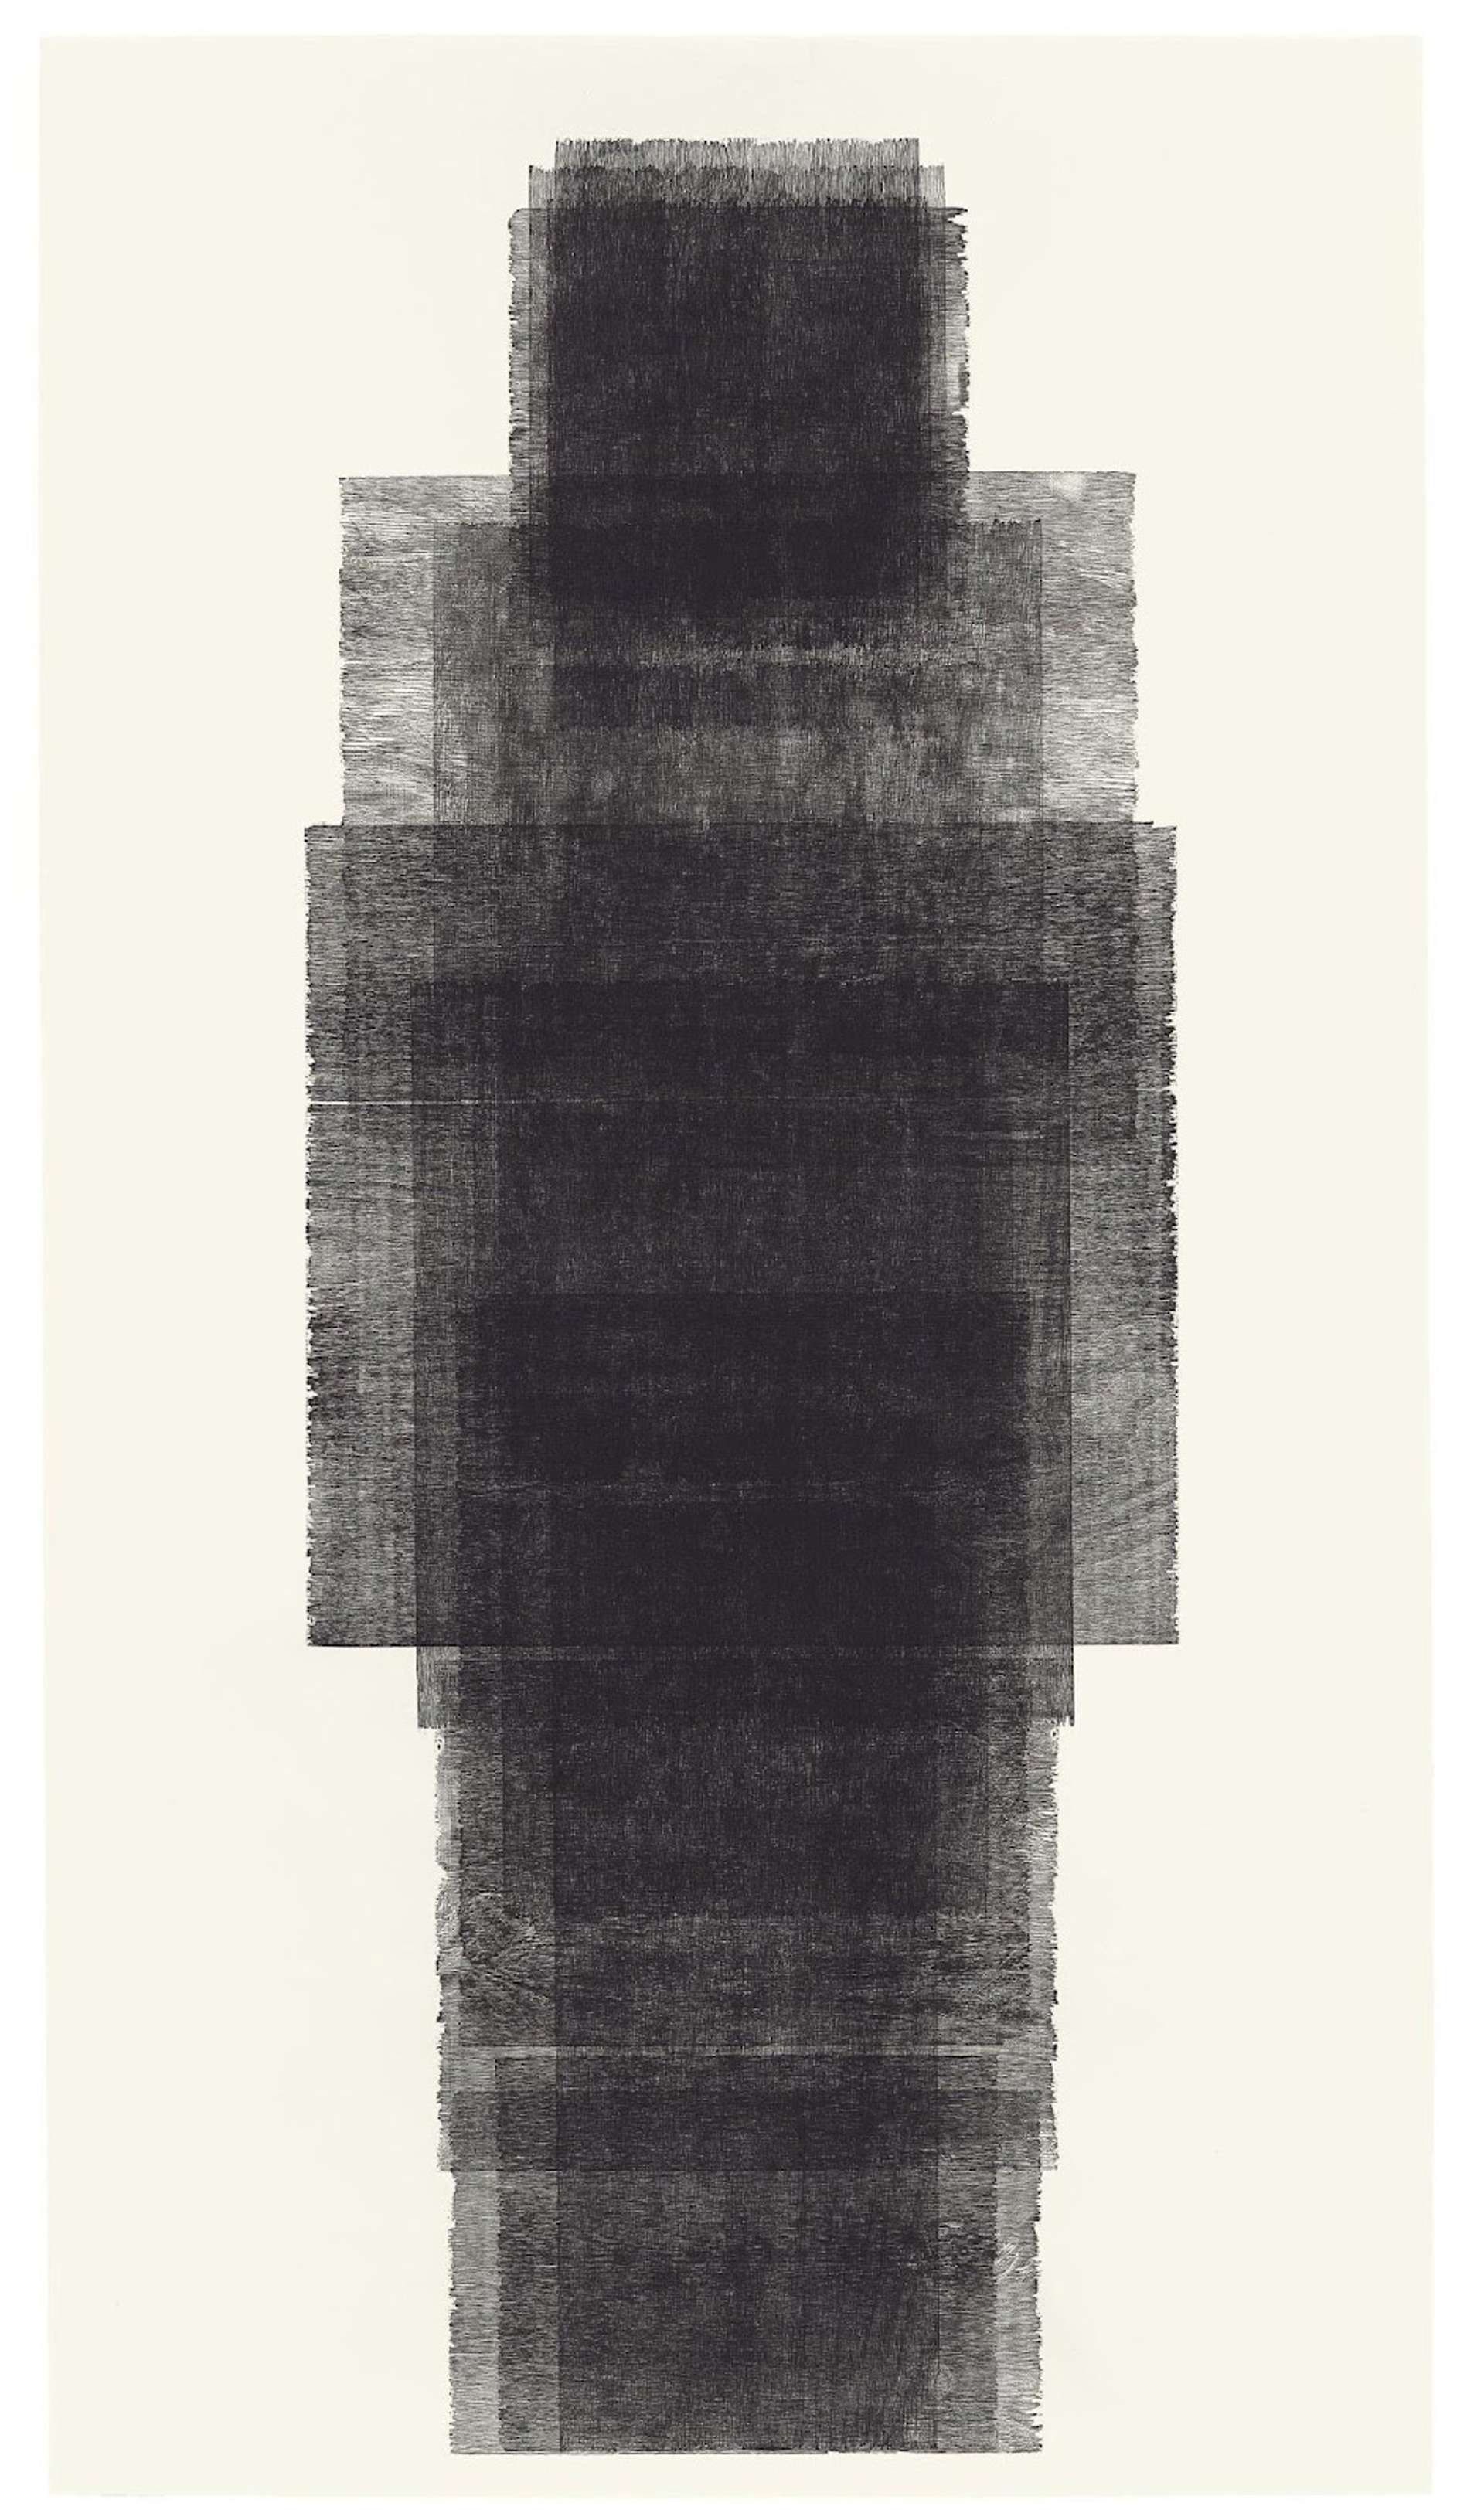 An image of the print Inhabit by artist Antony Gormley. It depicts a black and grey human-like shape composed entirely of blocks, with a light wood grain print.